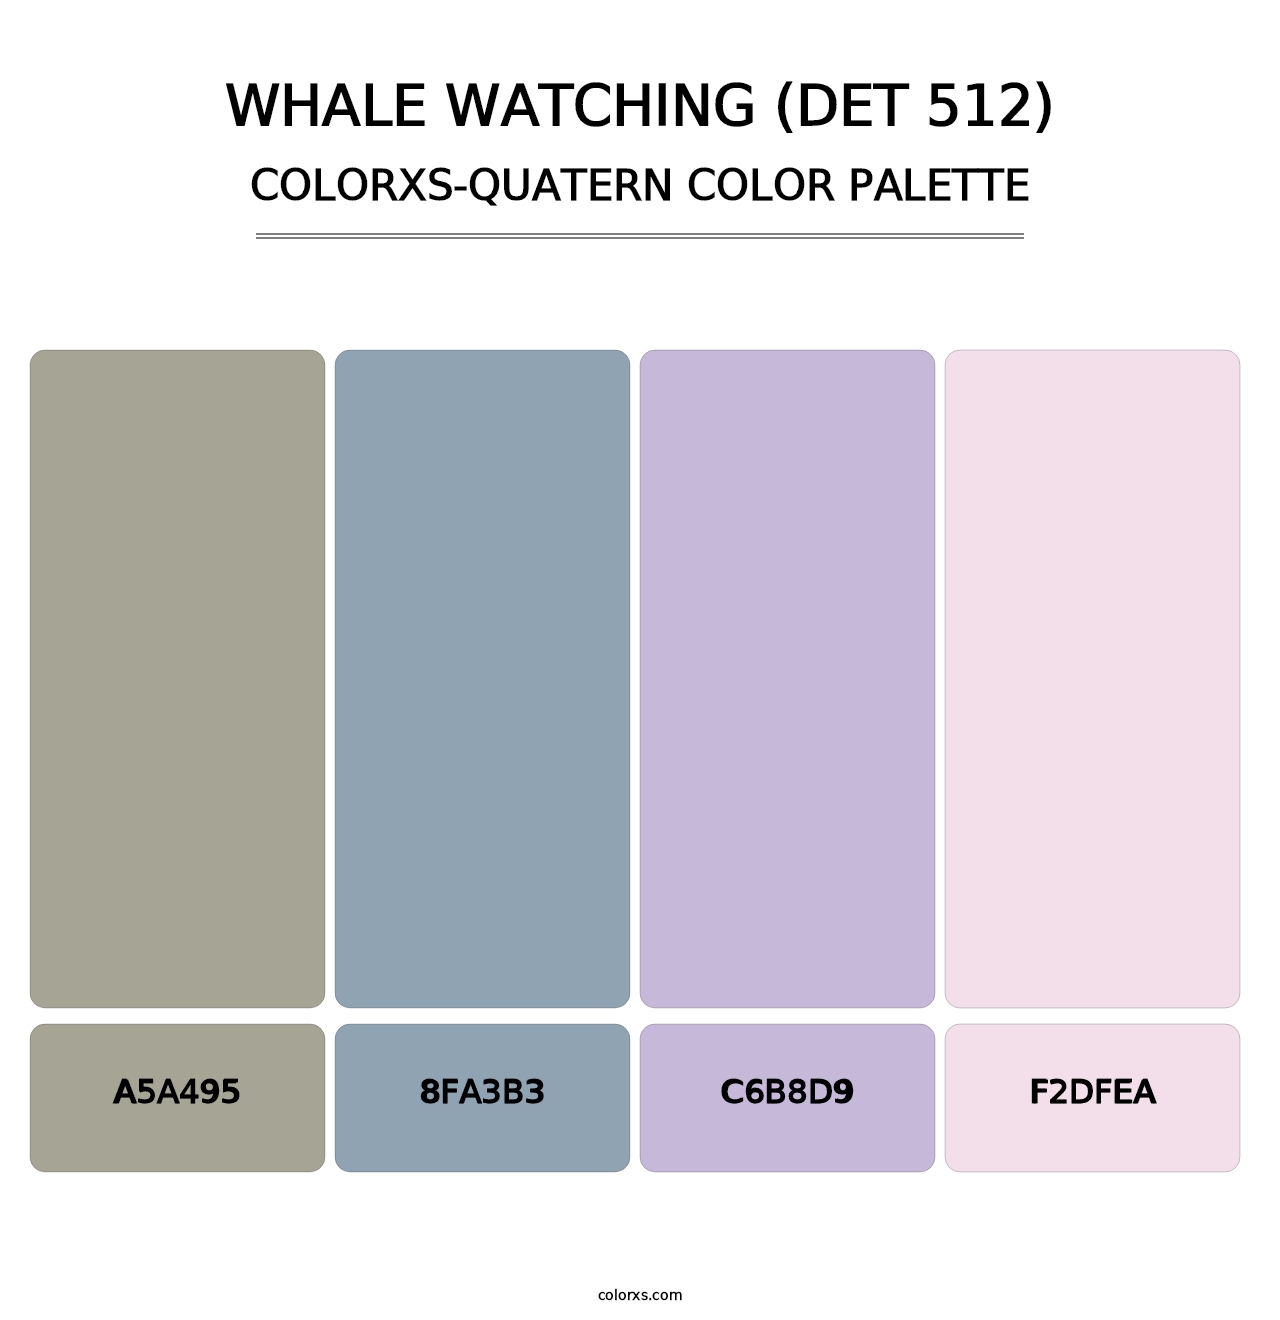 Whale Watching (DET 512) - Colorxs Quatern Palette